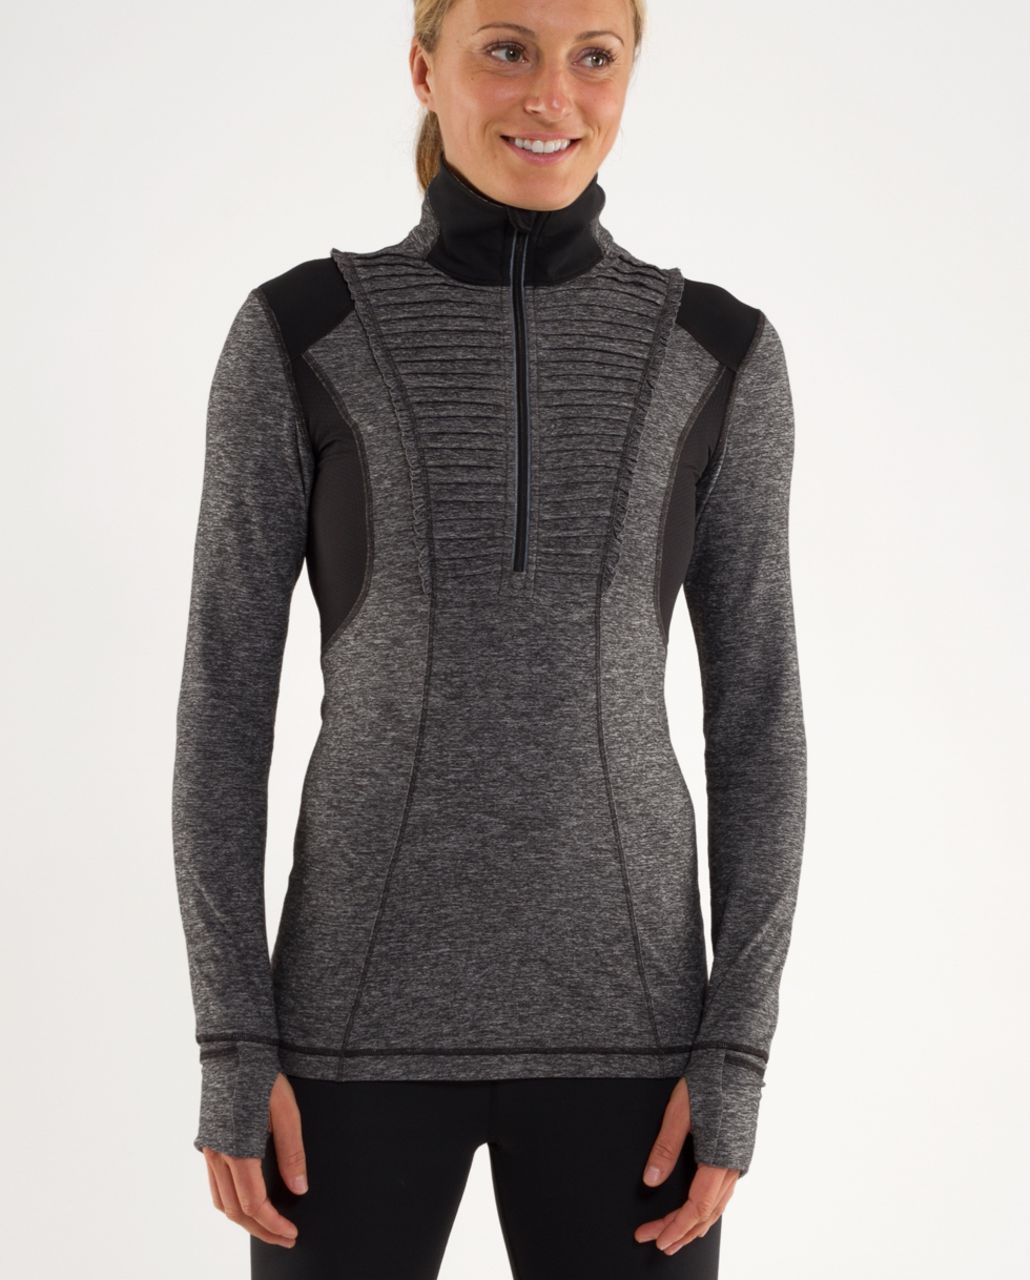 Lululemon Run:  Your Heart Out Pullover (First Release) - Heathered Black